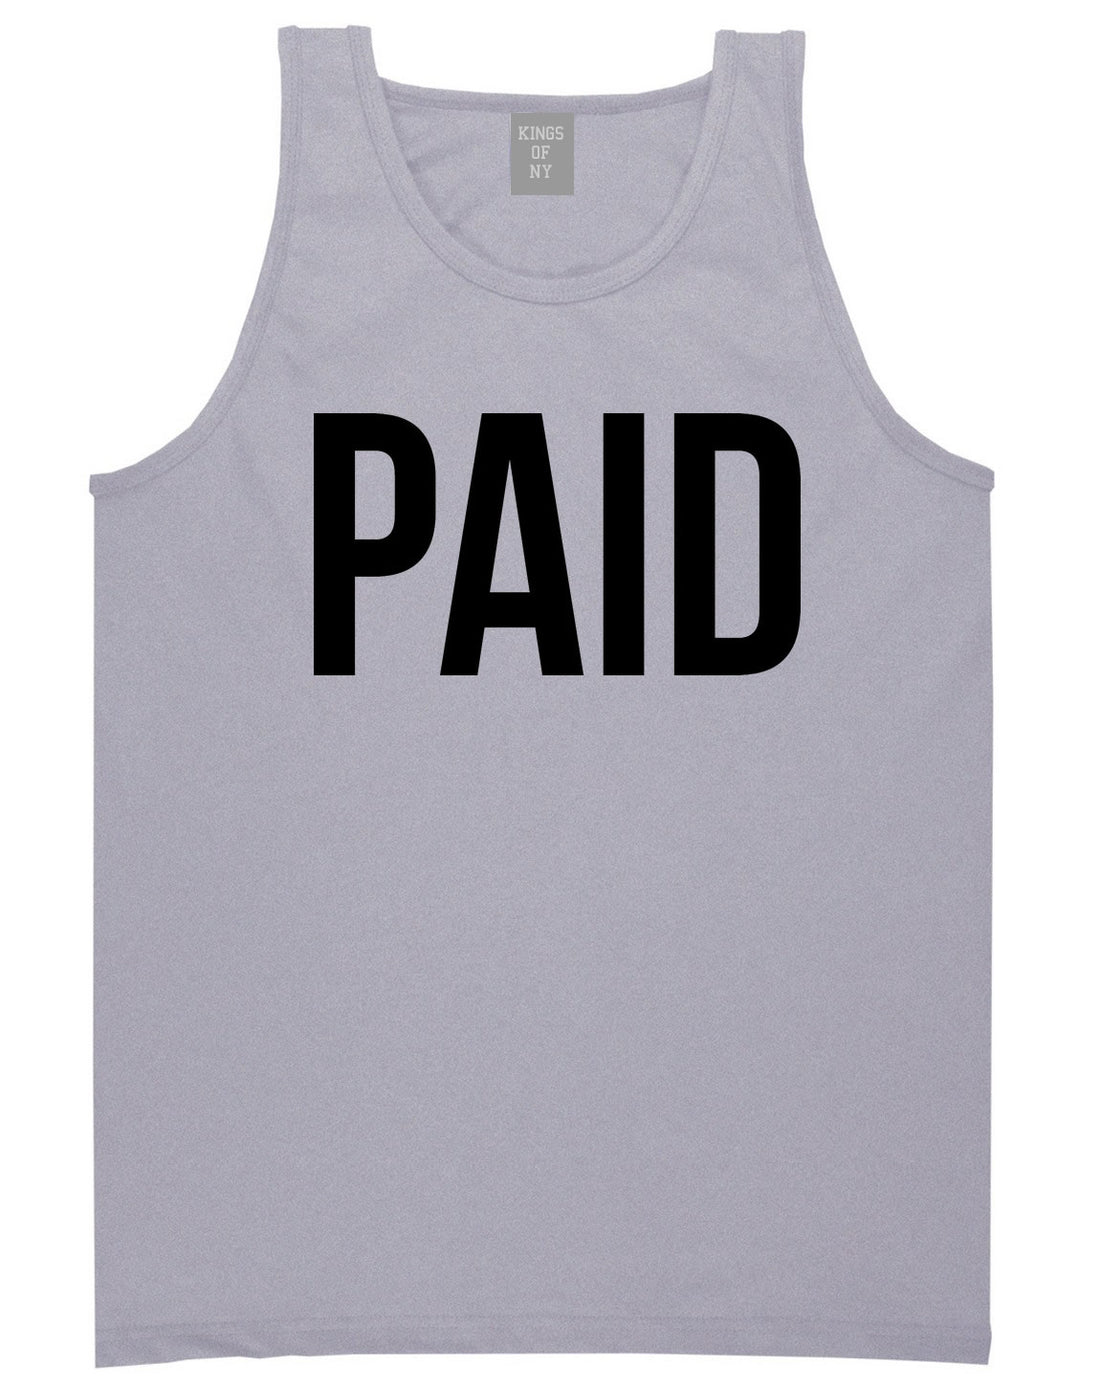 Kings Of NY Paid Tank Top in Grey